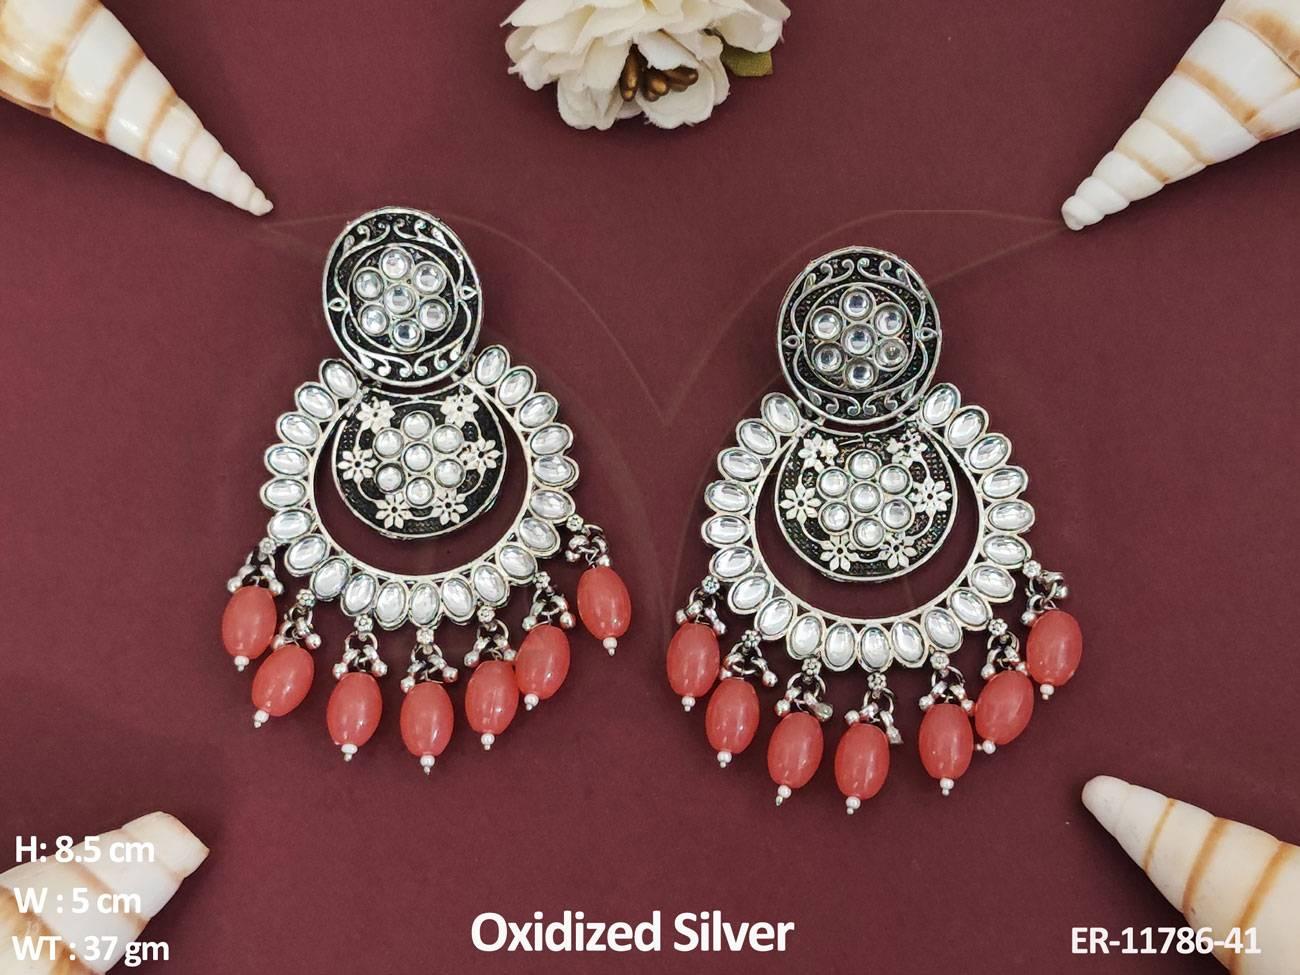 Perfect for any occasion, this set is a must-have for jewelry lovers.